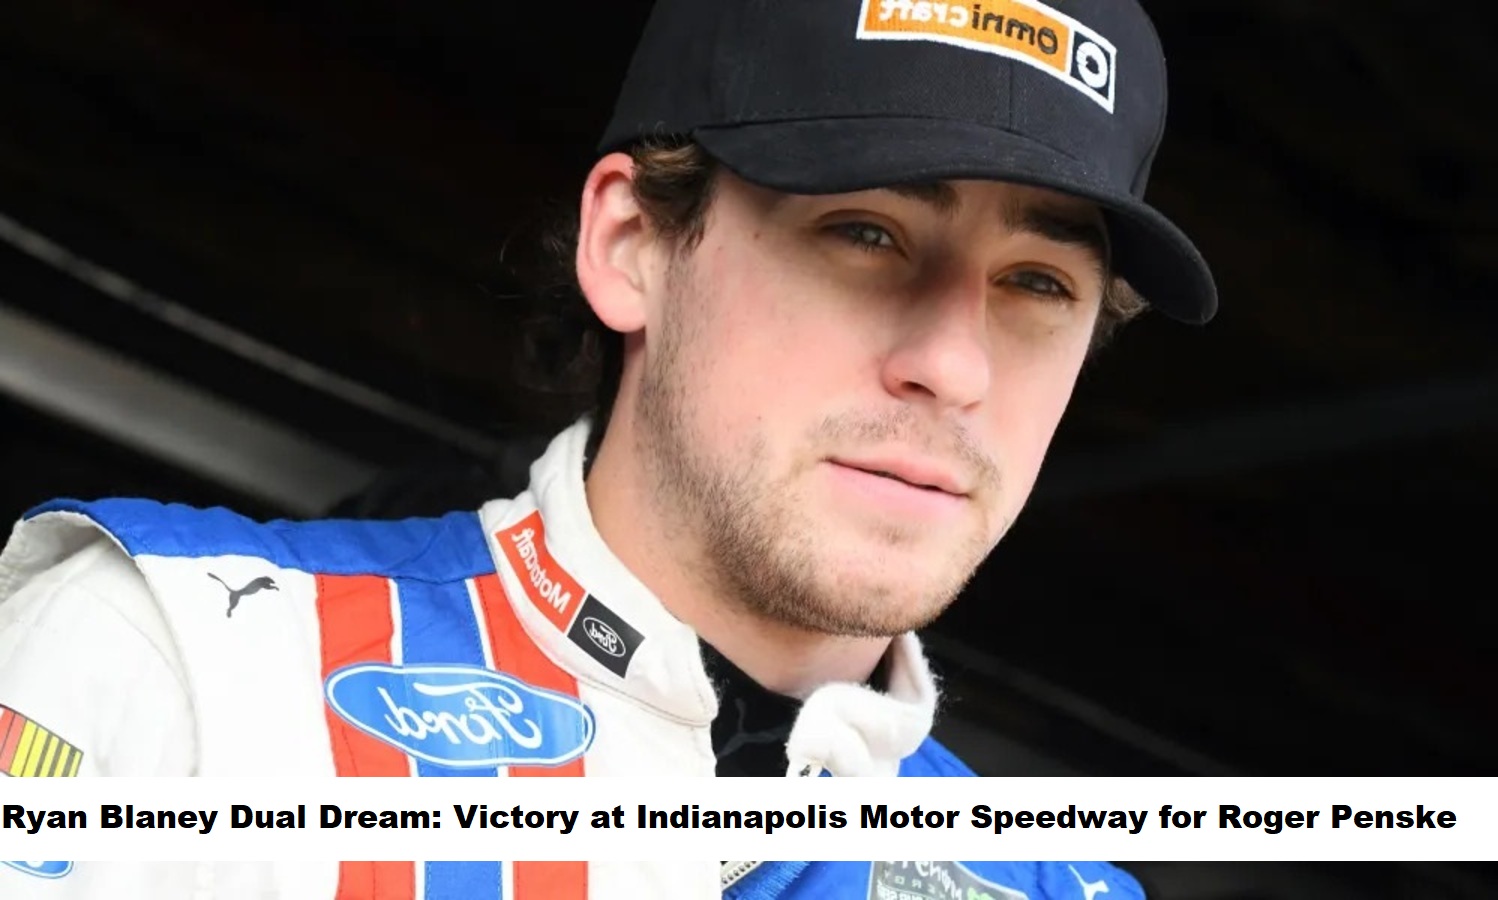 ryan-blaney-dual-dream-victory-at-indianapolis-motor-speedway-for-roger-penske